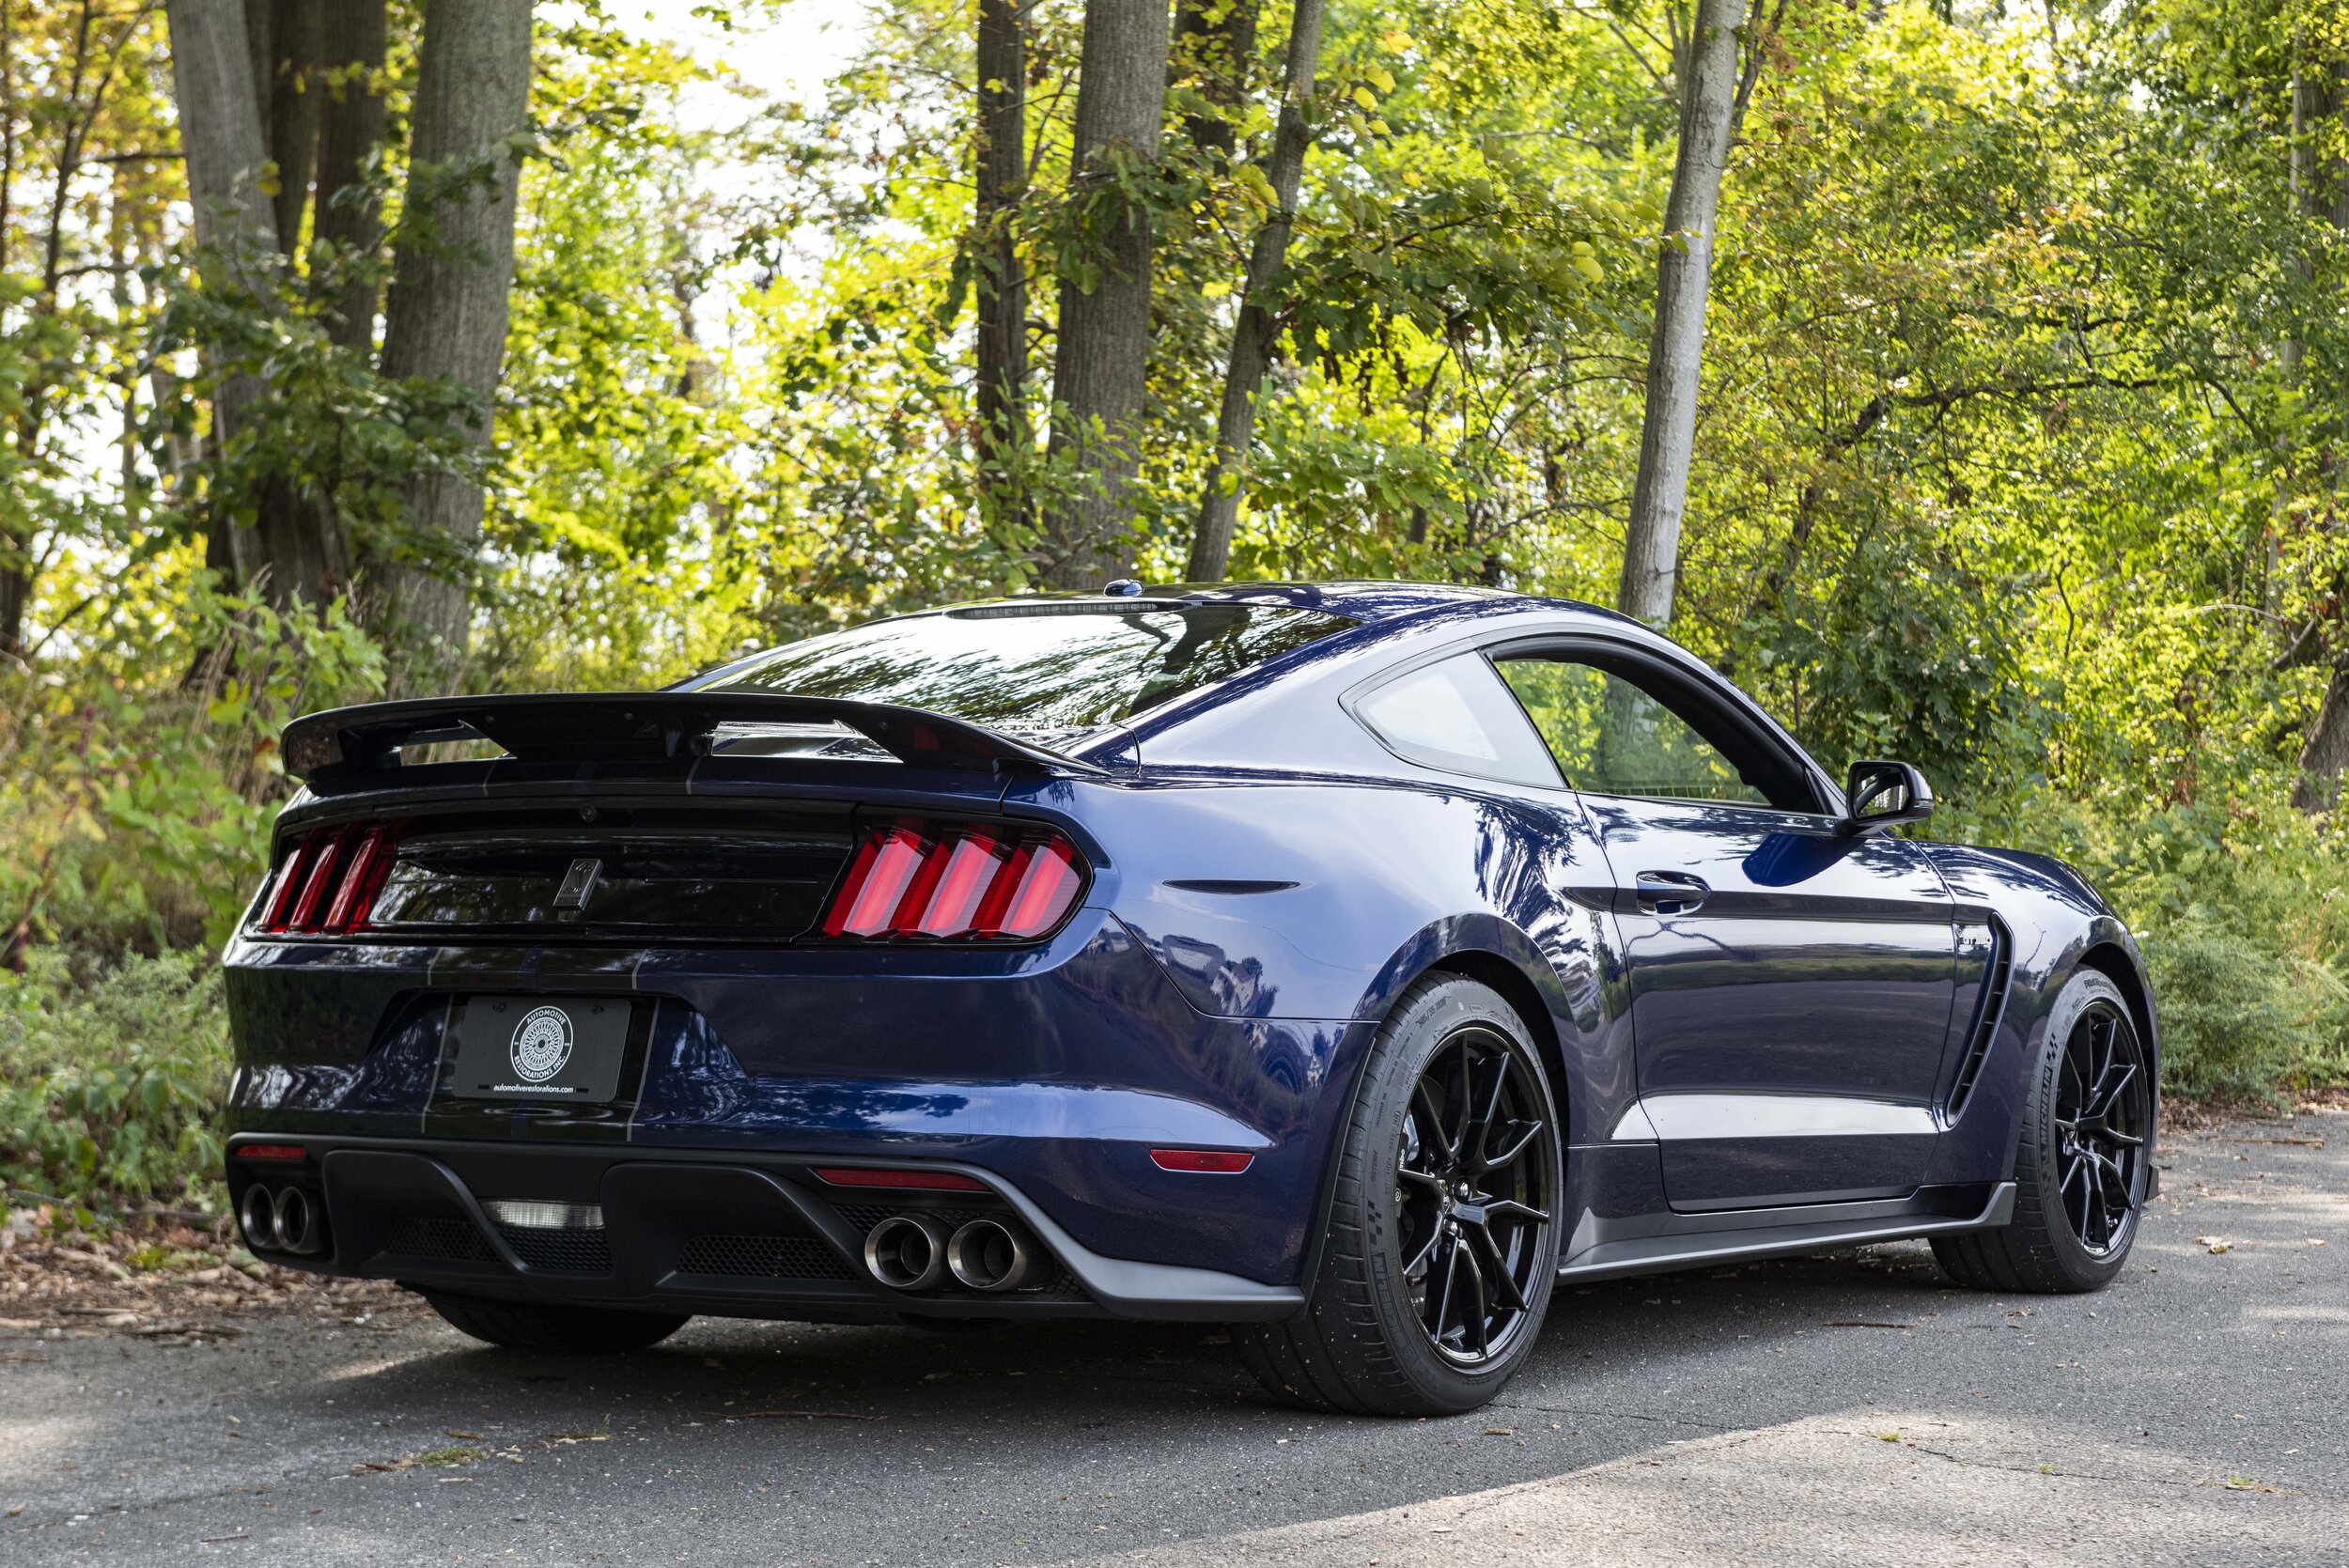 2019 Ford Mustang Shelby GT350 For Sale | Automotive Restorations, Inc ...